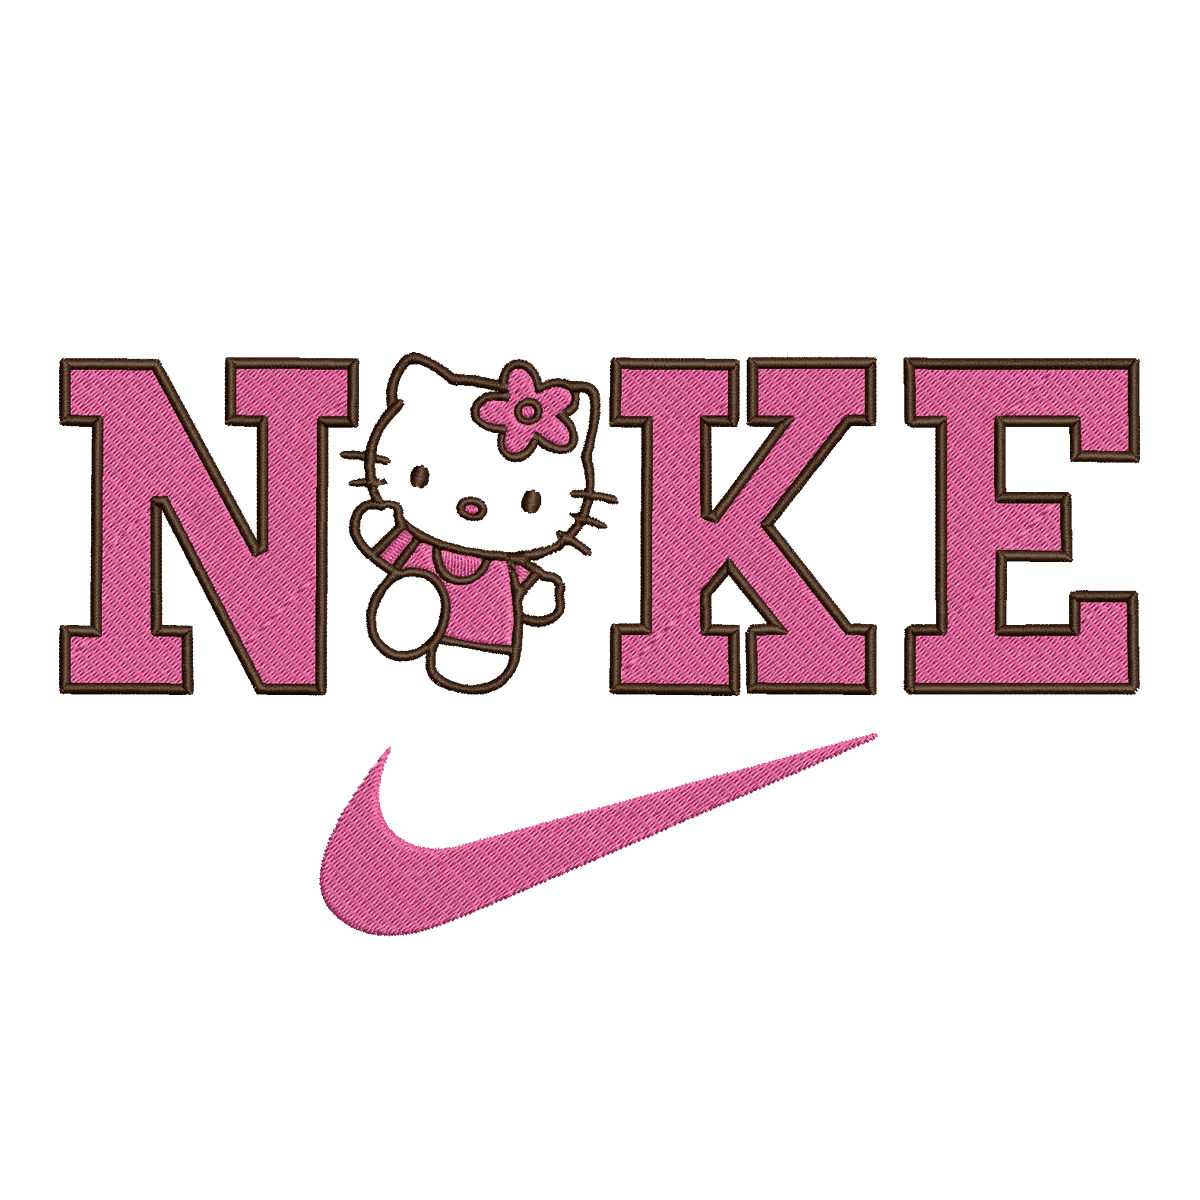 Nike and Hello Kitty - Embroidery Design - FineryEmbroidery